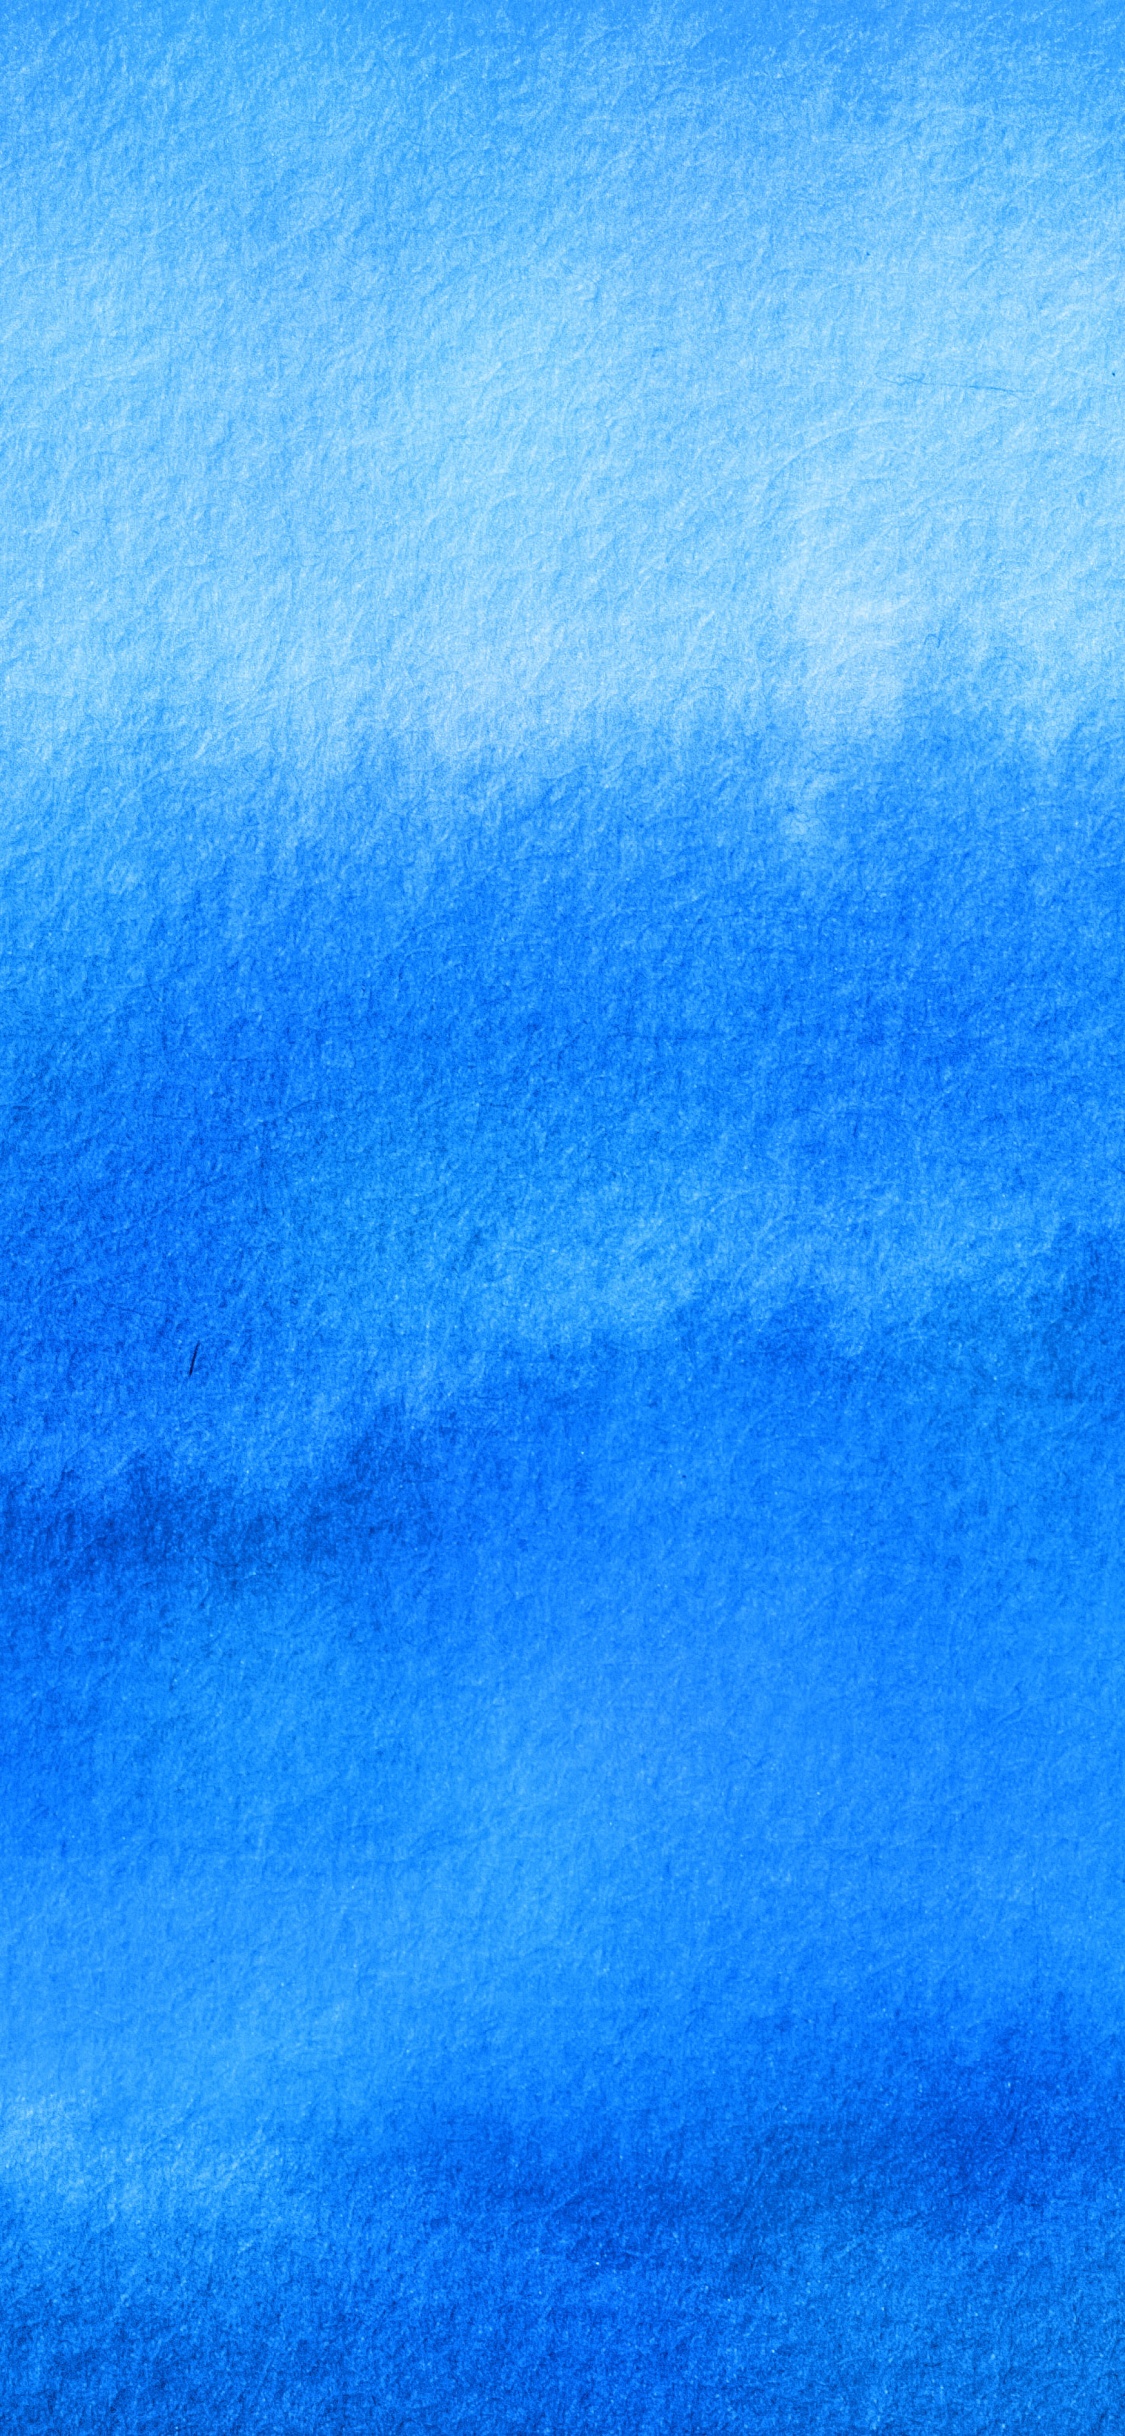 Blue and White Clouds During Daytime. Wallpaper in 1125x2436 Resolution